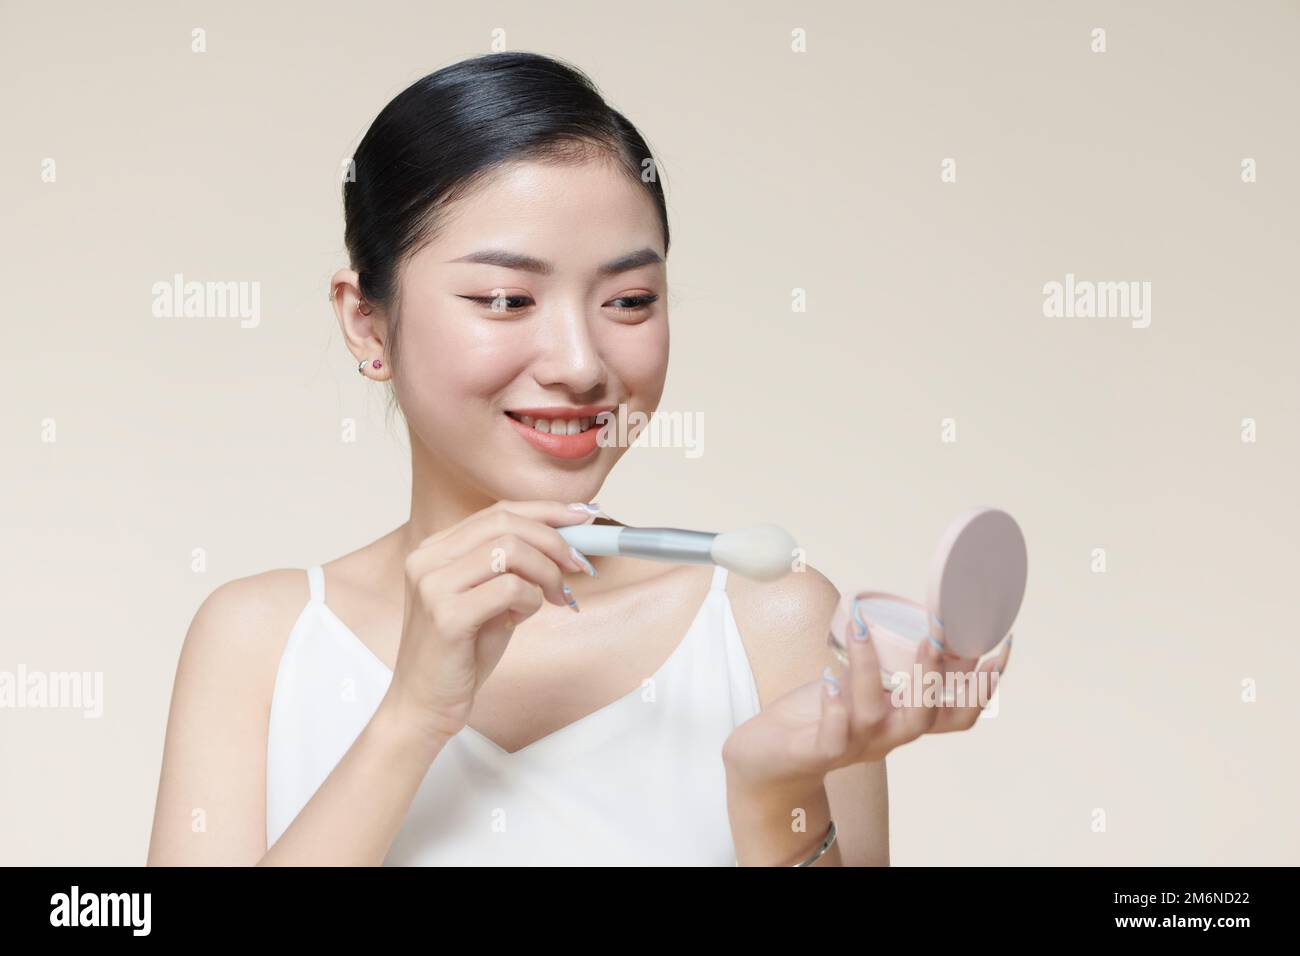 Young woman with makeup holding powder brush against baige background Stock Photo